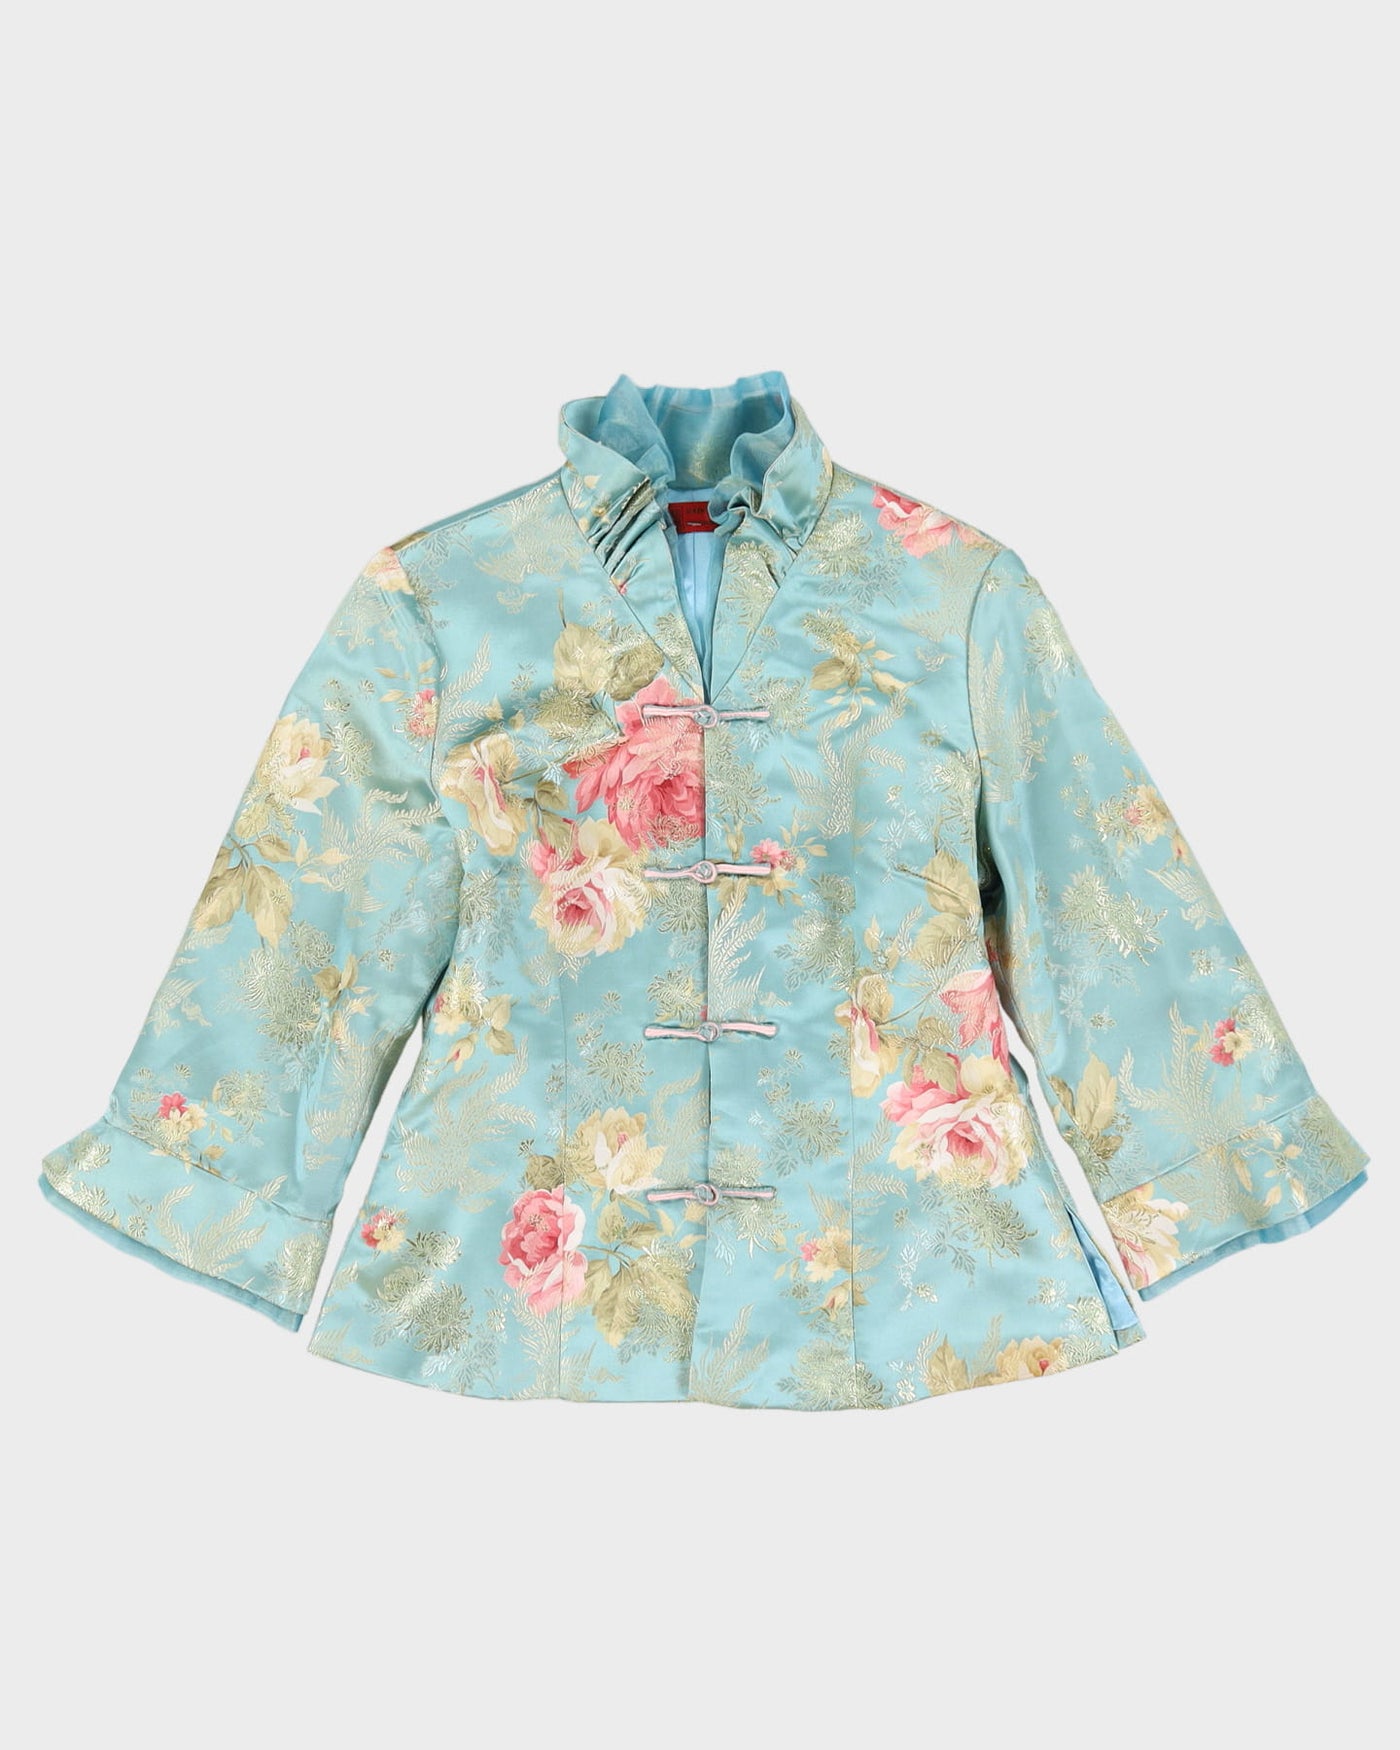 Blue And Pink Floral Cheongsam Jacket - S